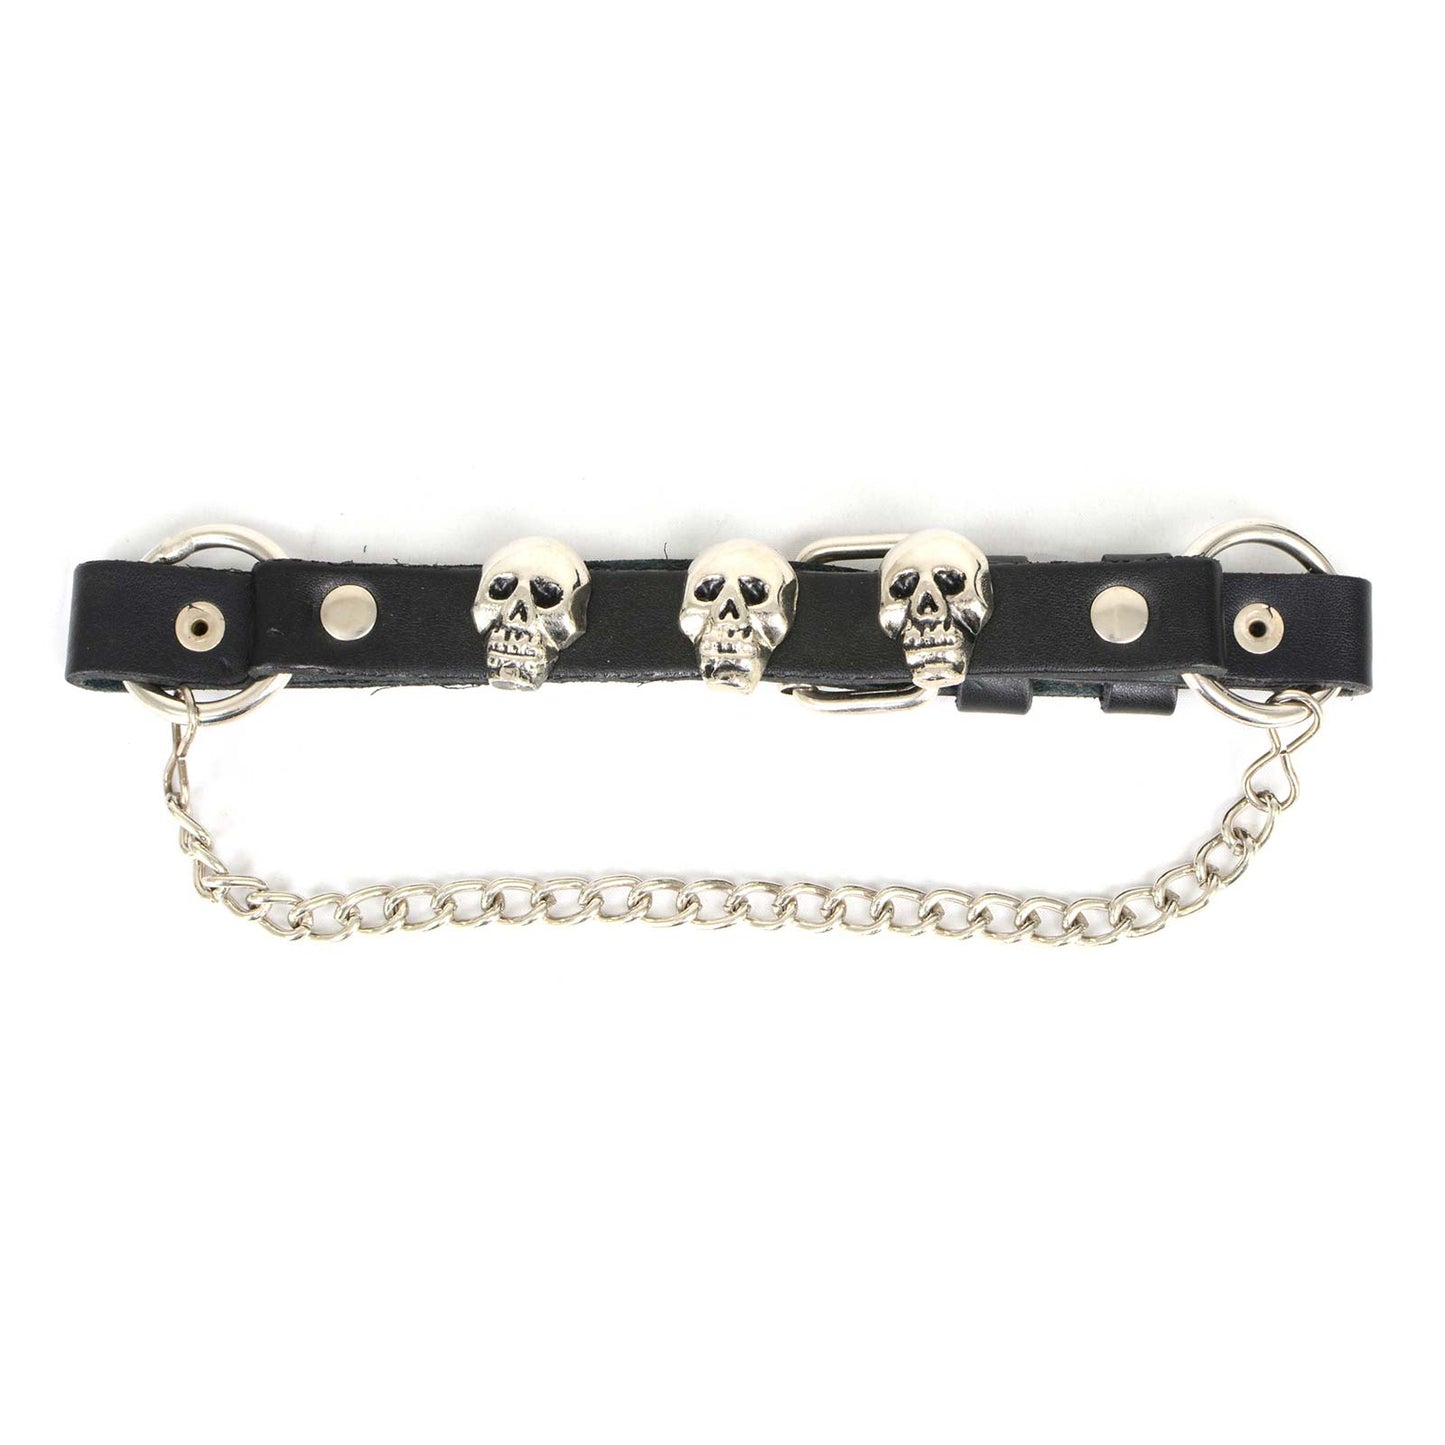 Milwaukee Leather MLA3007 Silver Classic Skull Heads Biker Chain for Motorcycle Boots